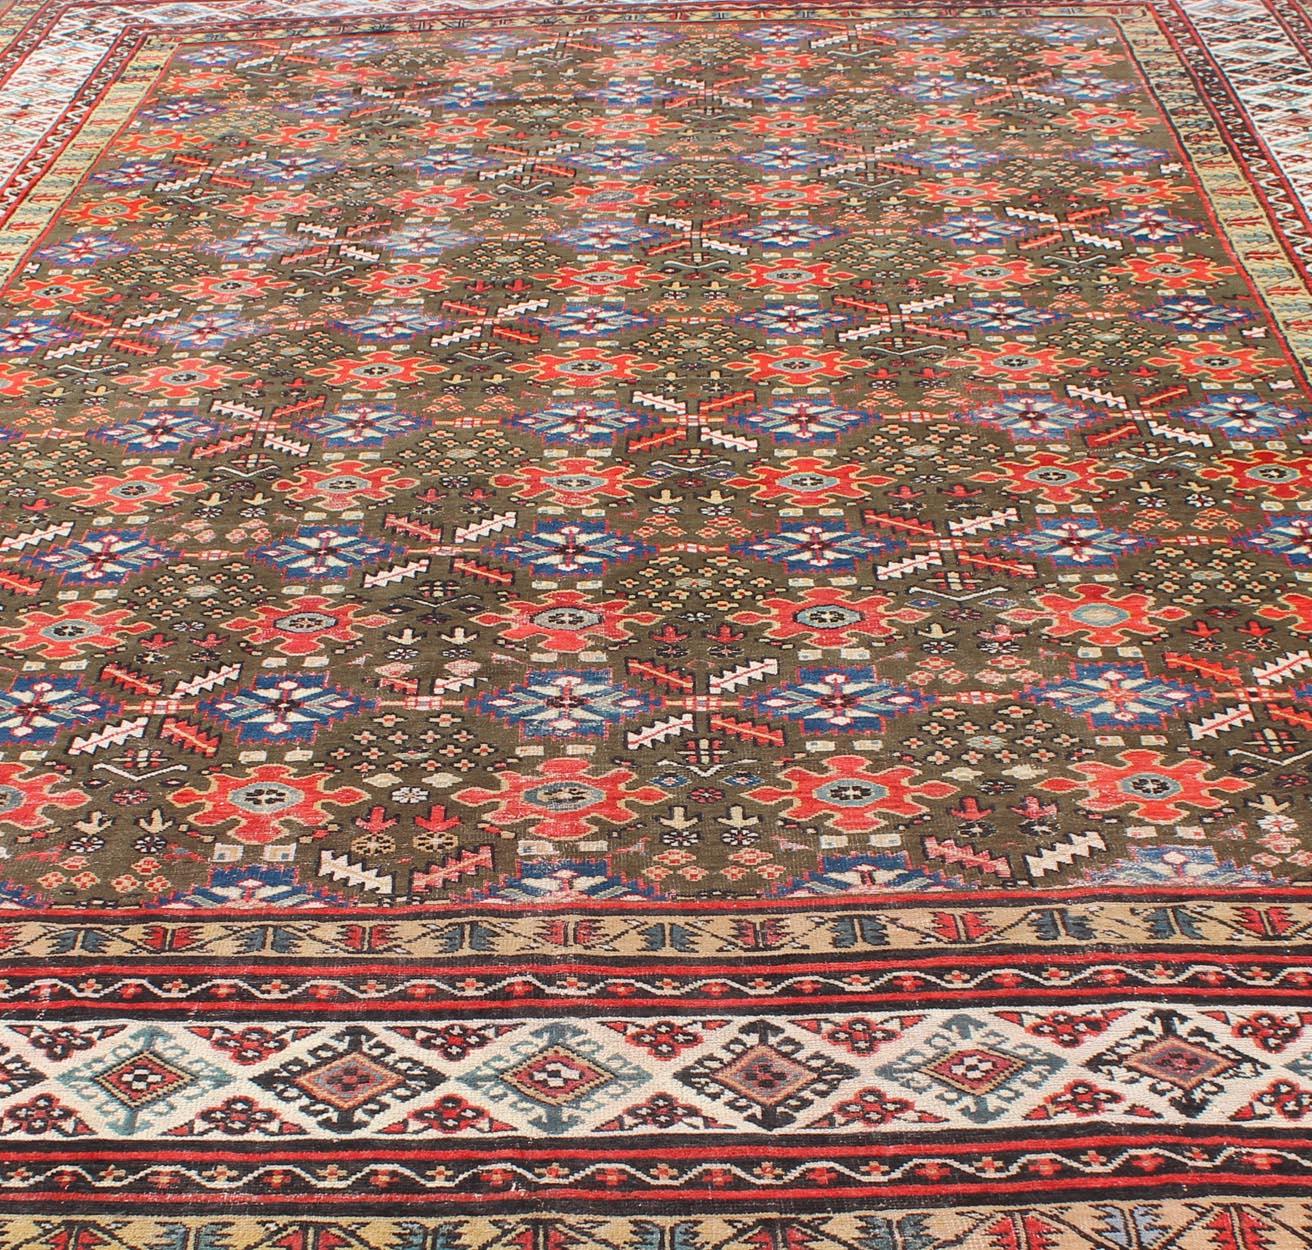 19th Century Large Antique Kurdish Rug with All-Over Design in Brown/Green, Red, and Blue For Sale